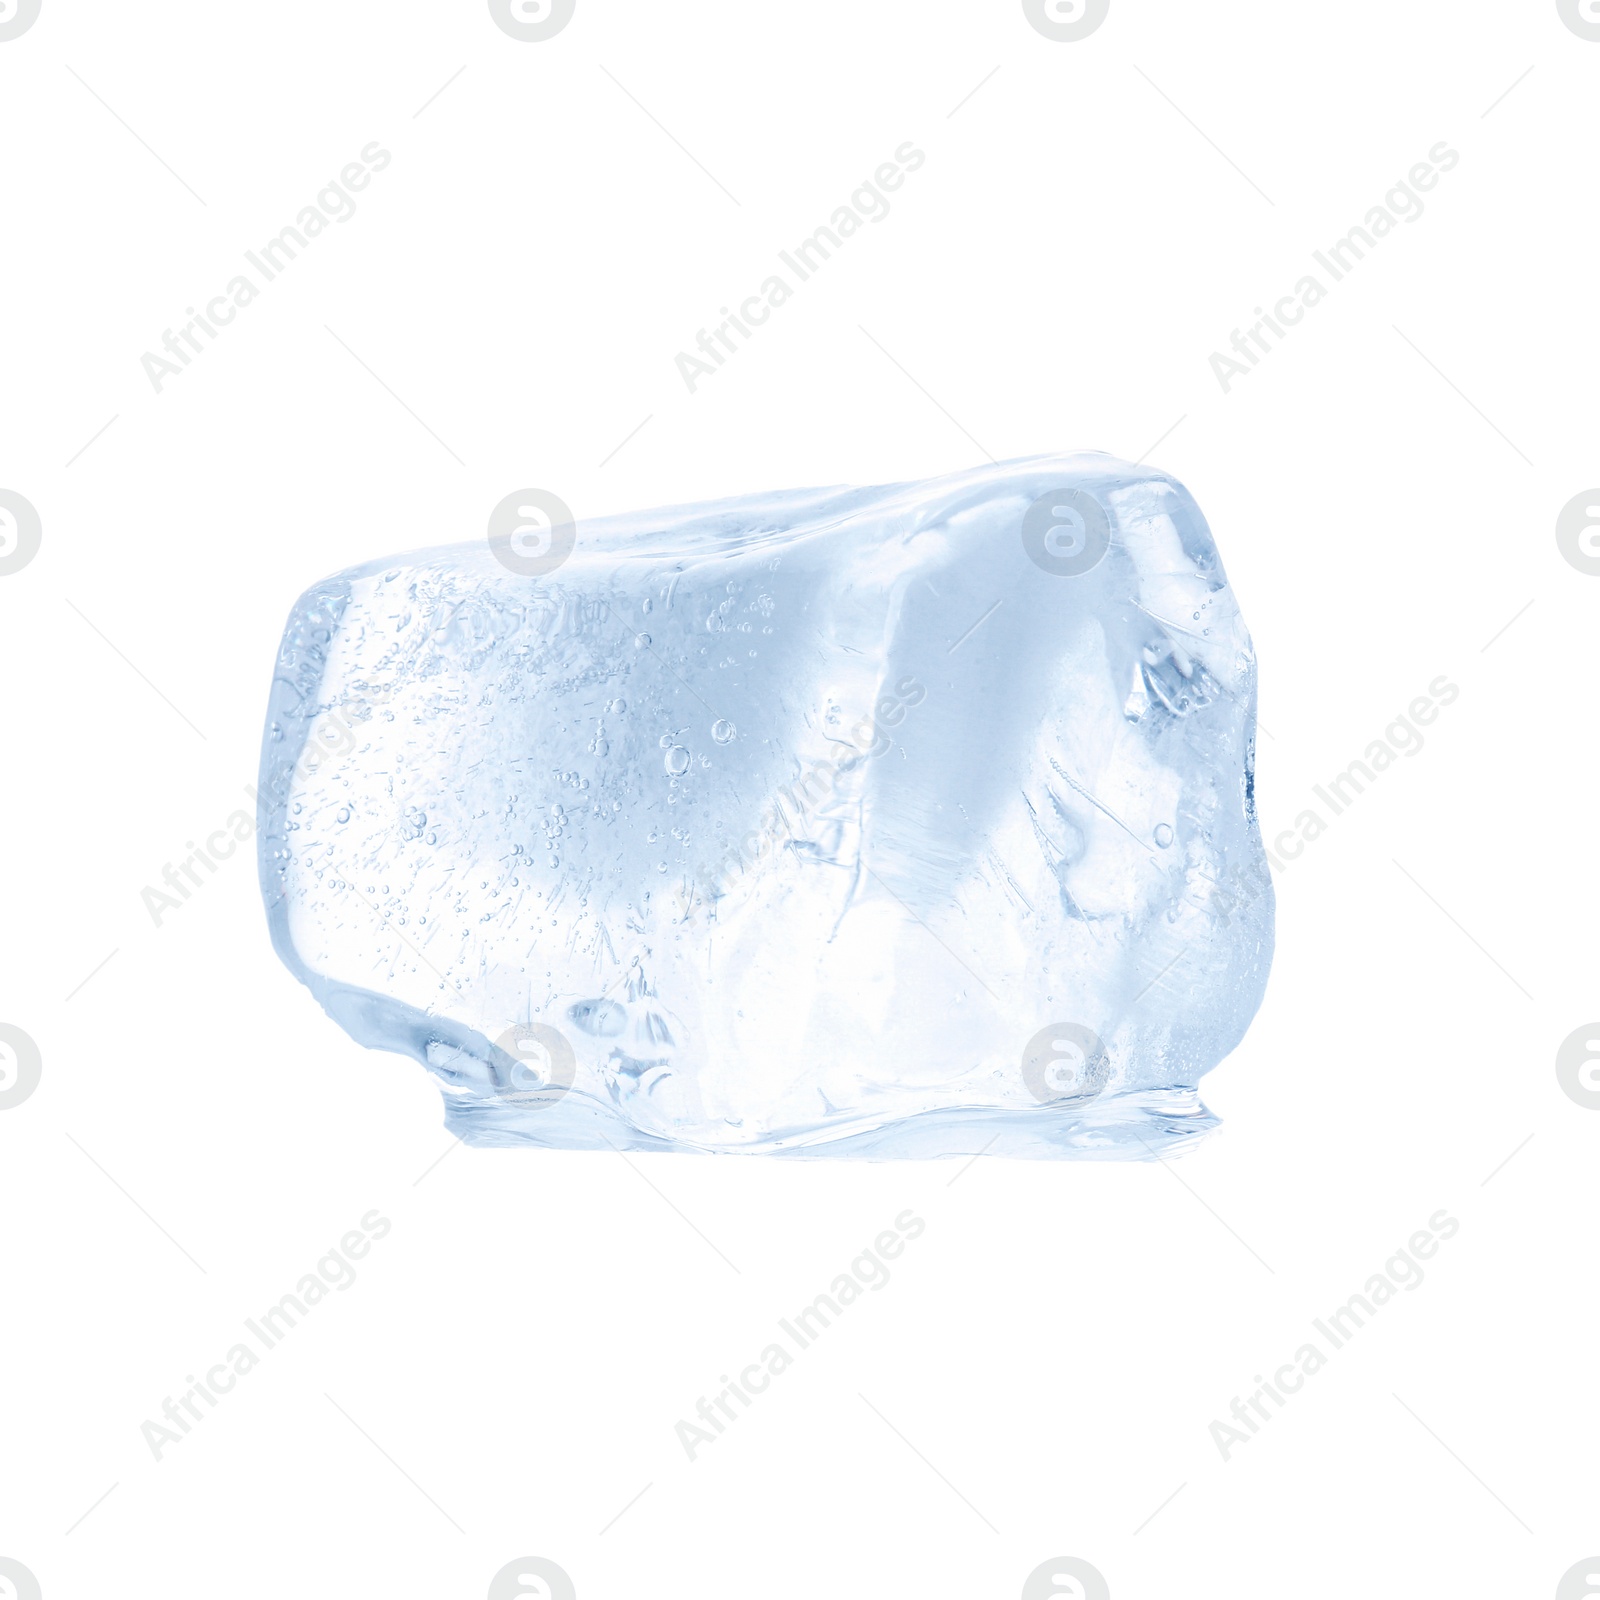 Photo of Piece of clear ice isolated on white